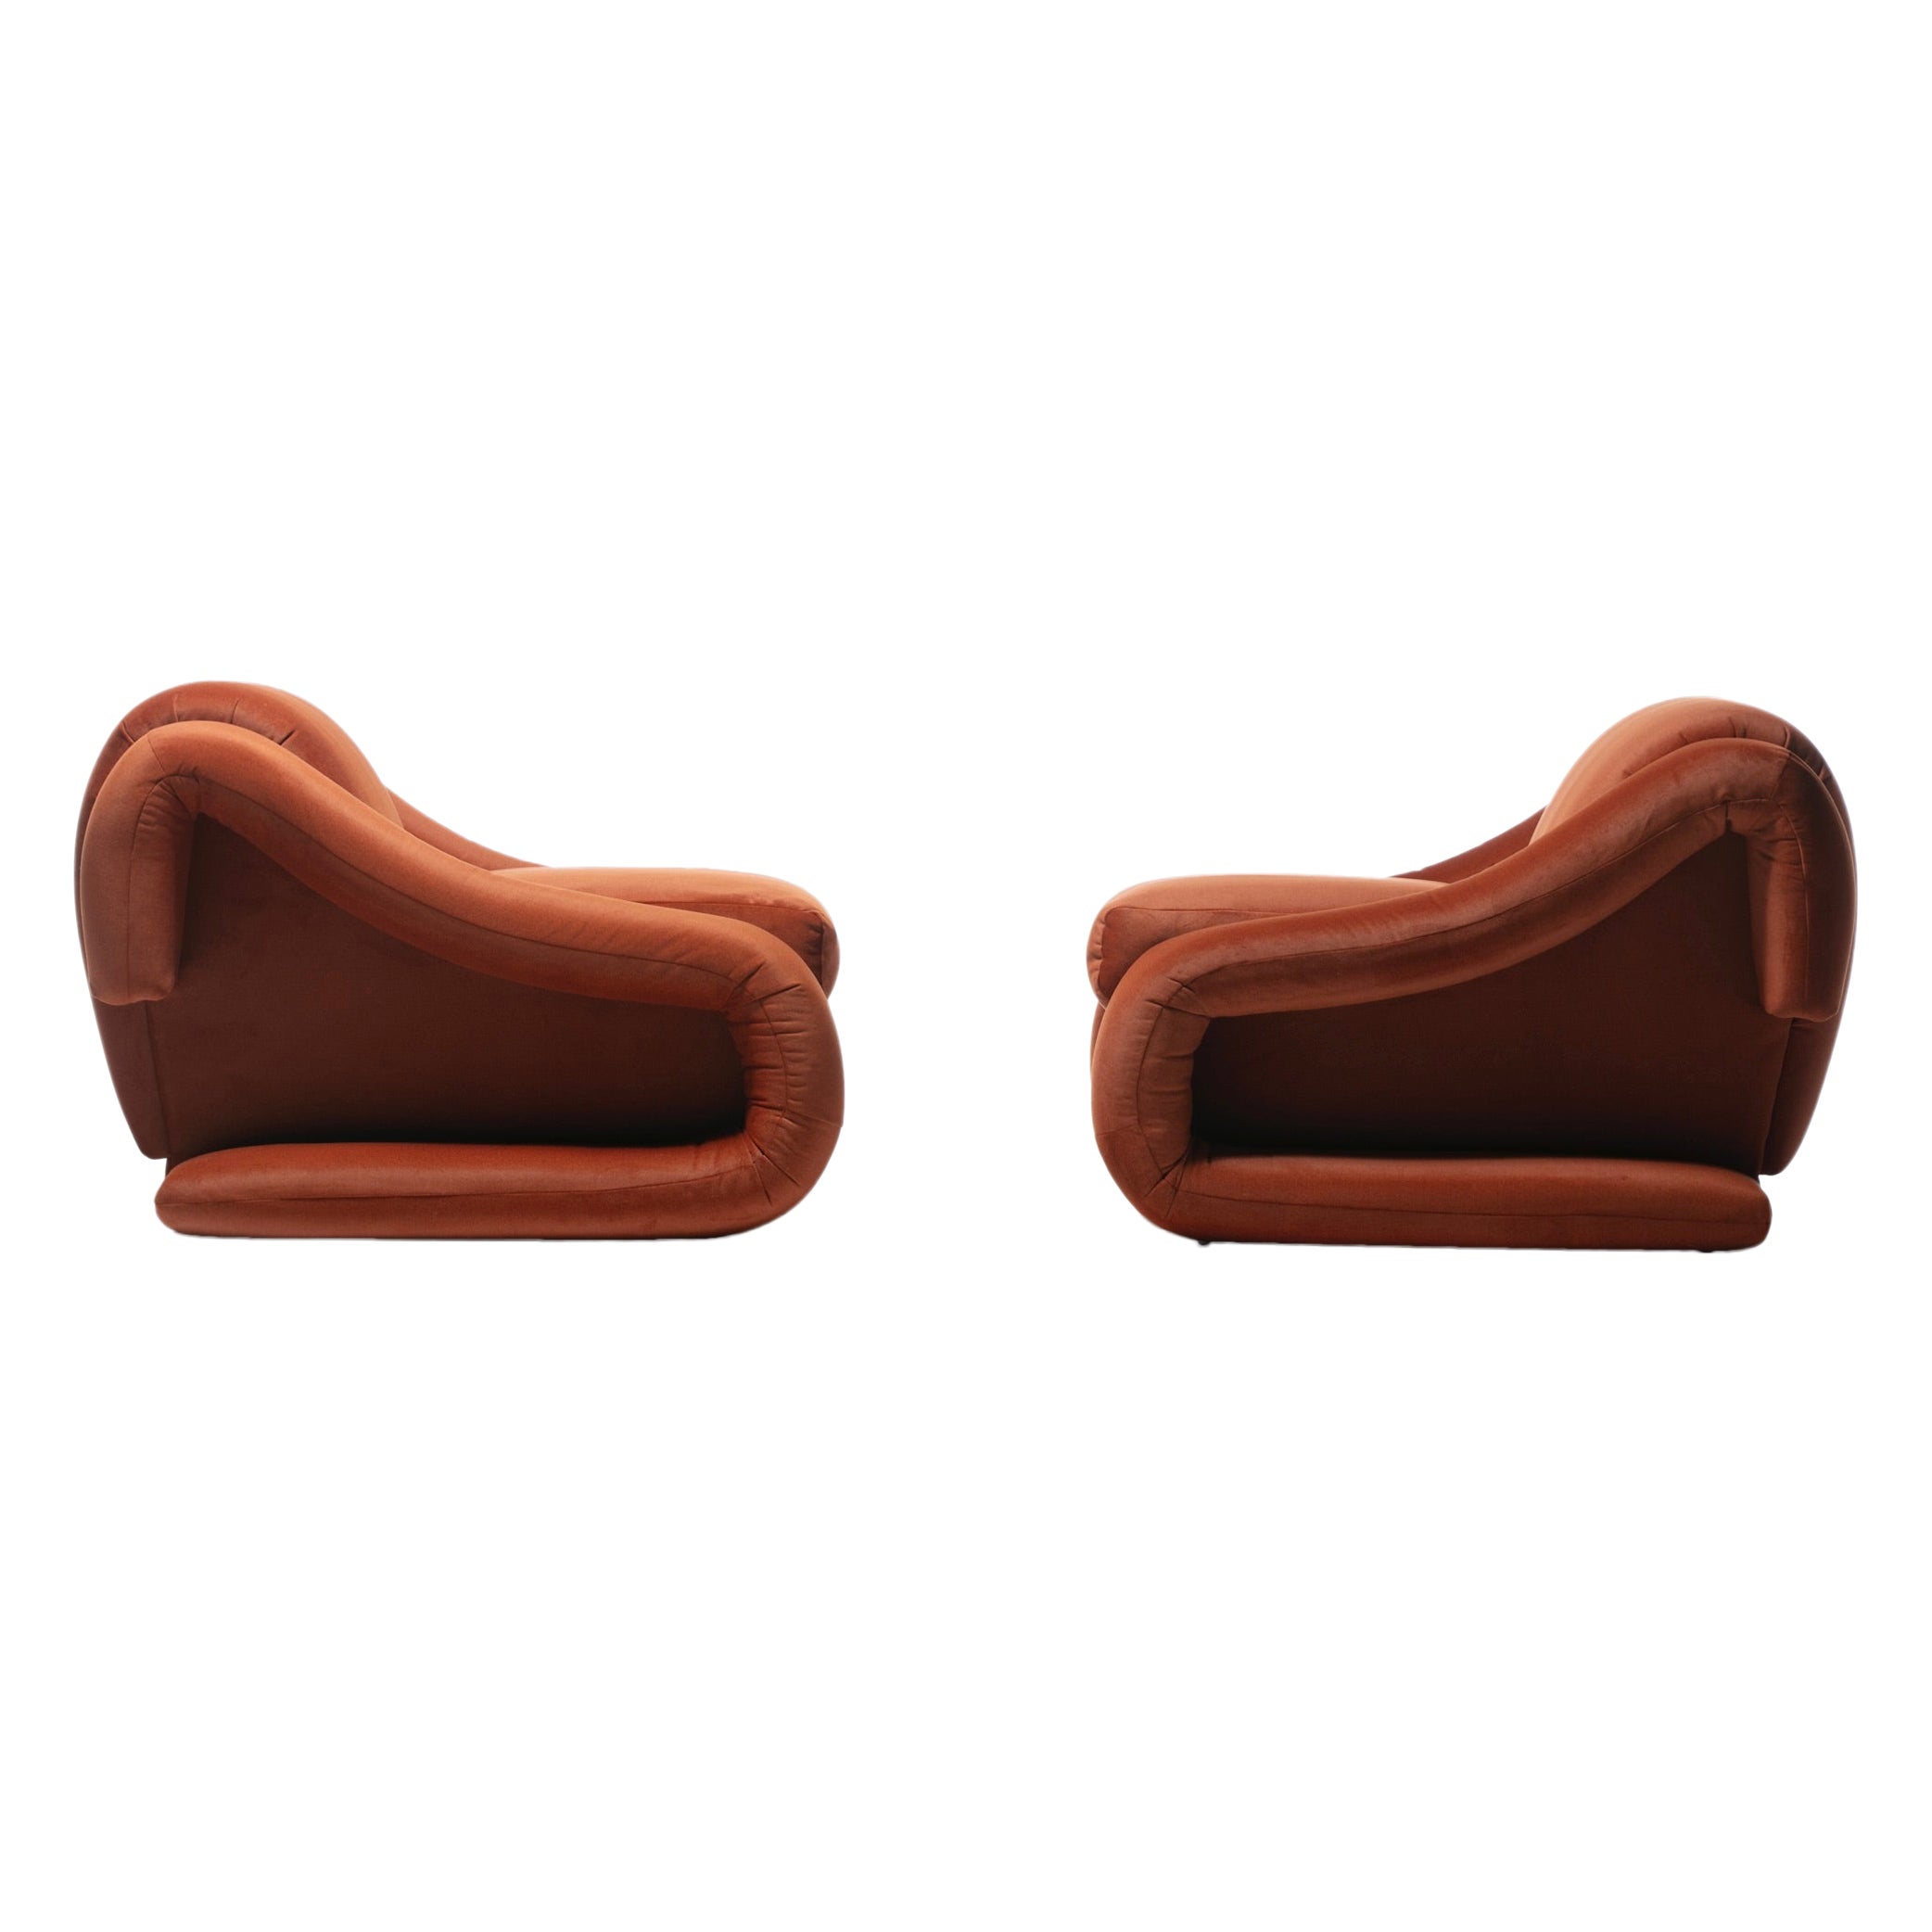 Monumental Post Modern Pair of Weiman Lounge Chairs in Marmalade Orange Fabric